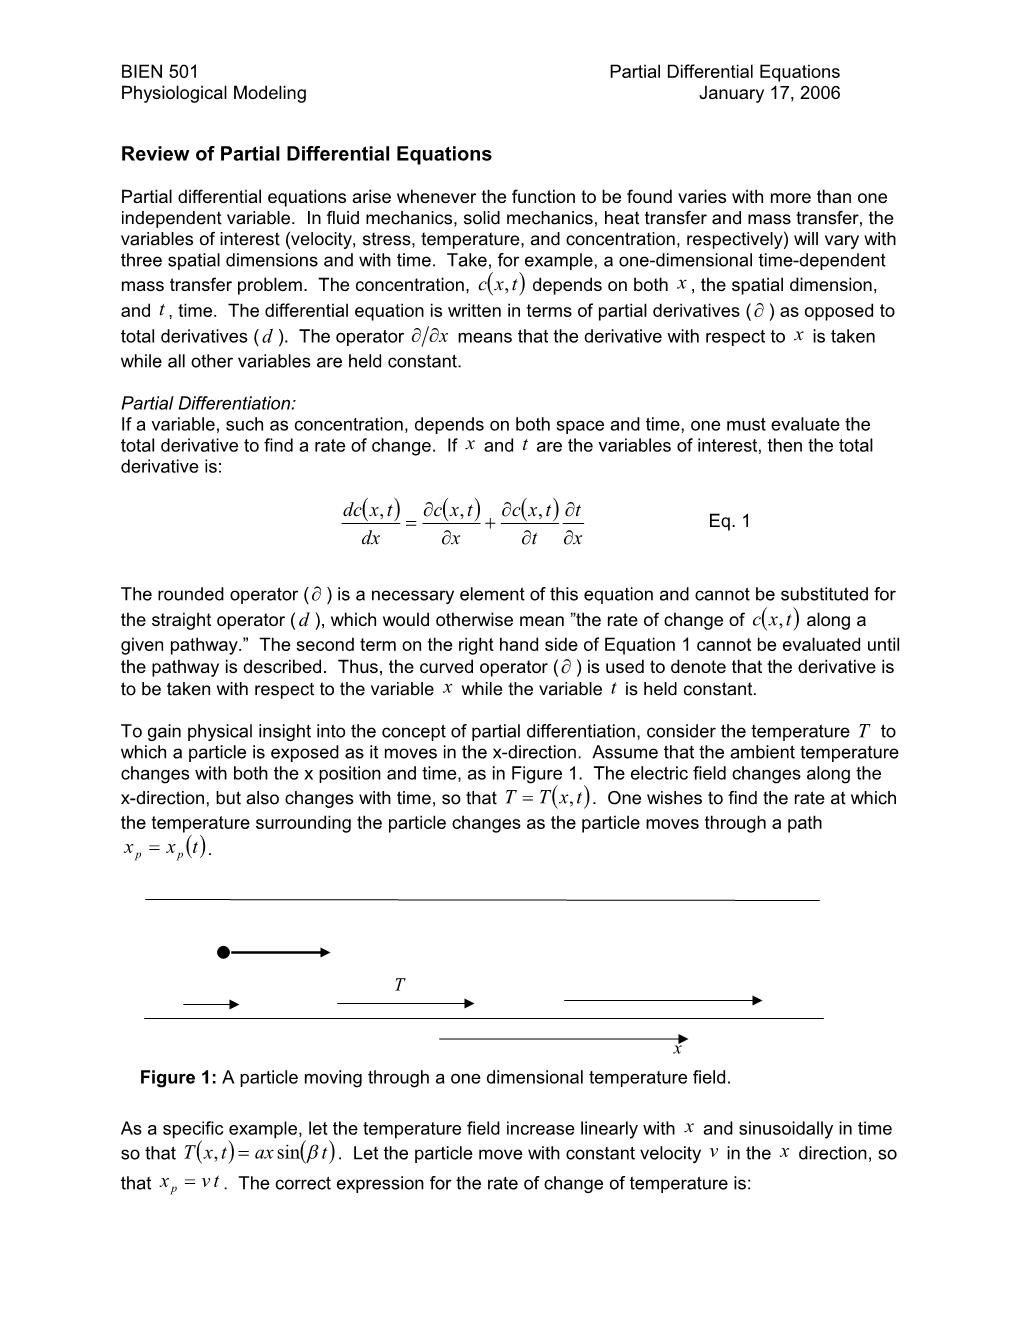 Review of Partial Differential Equations